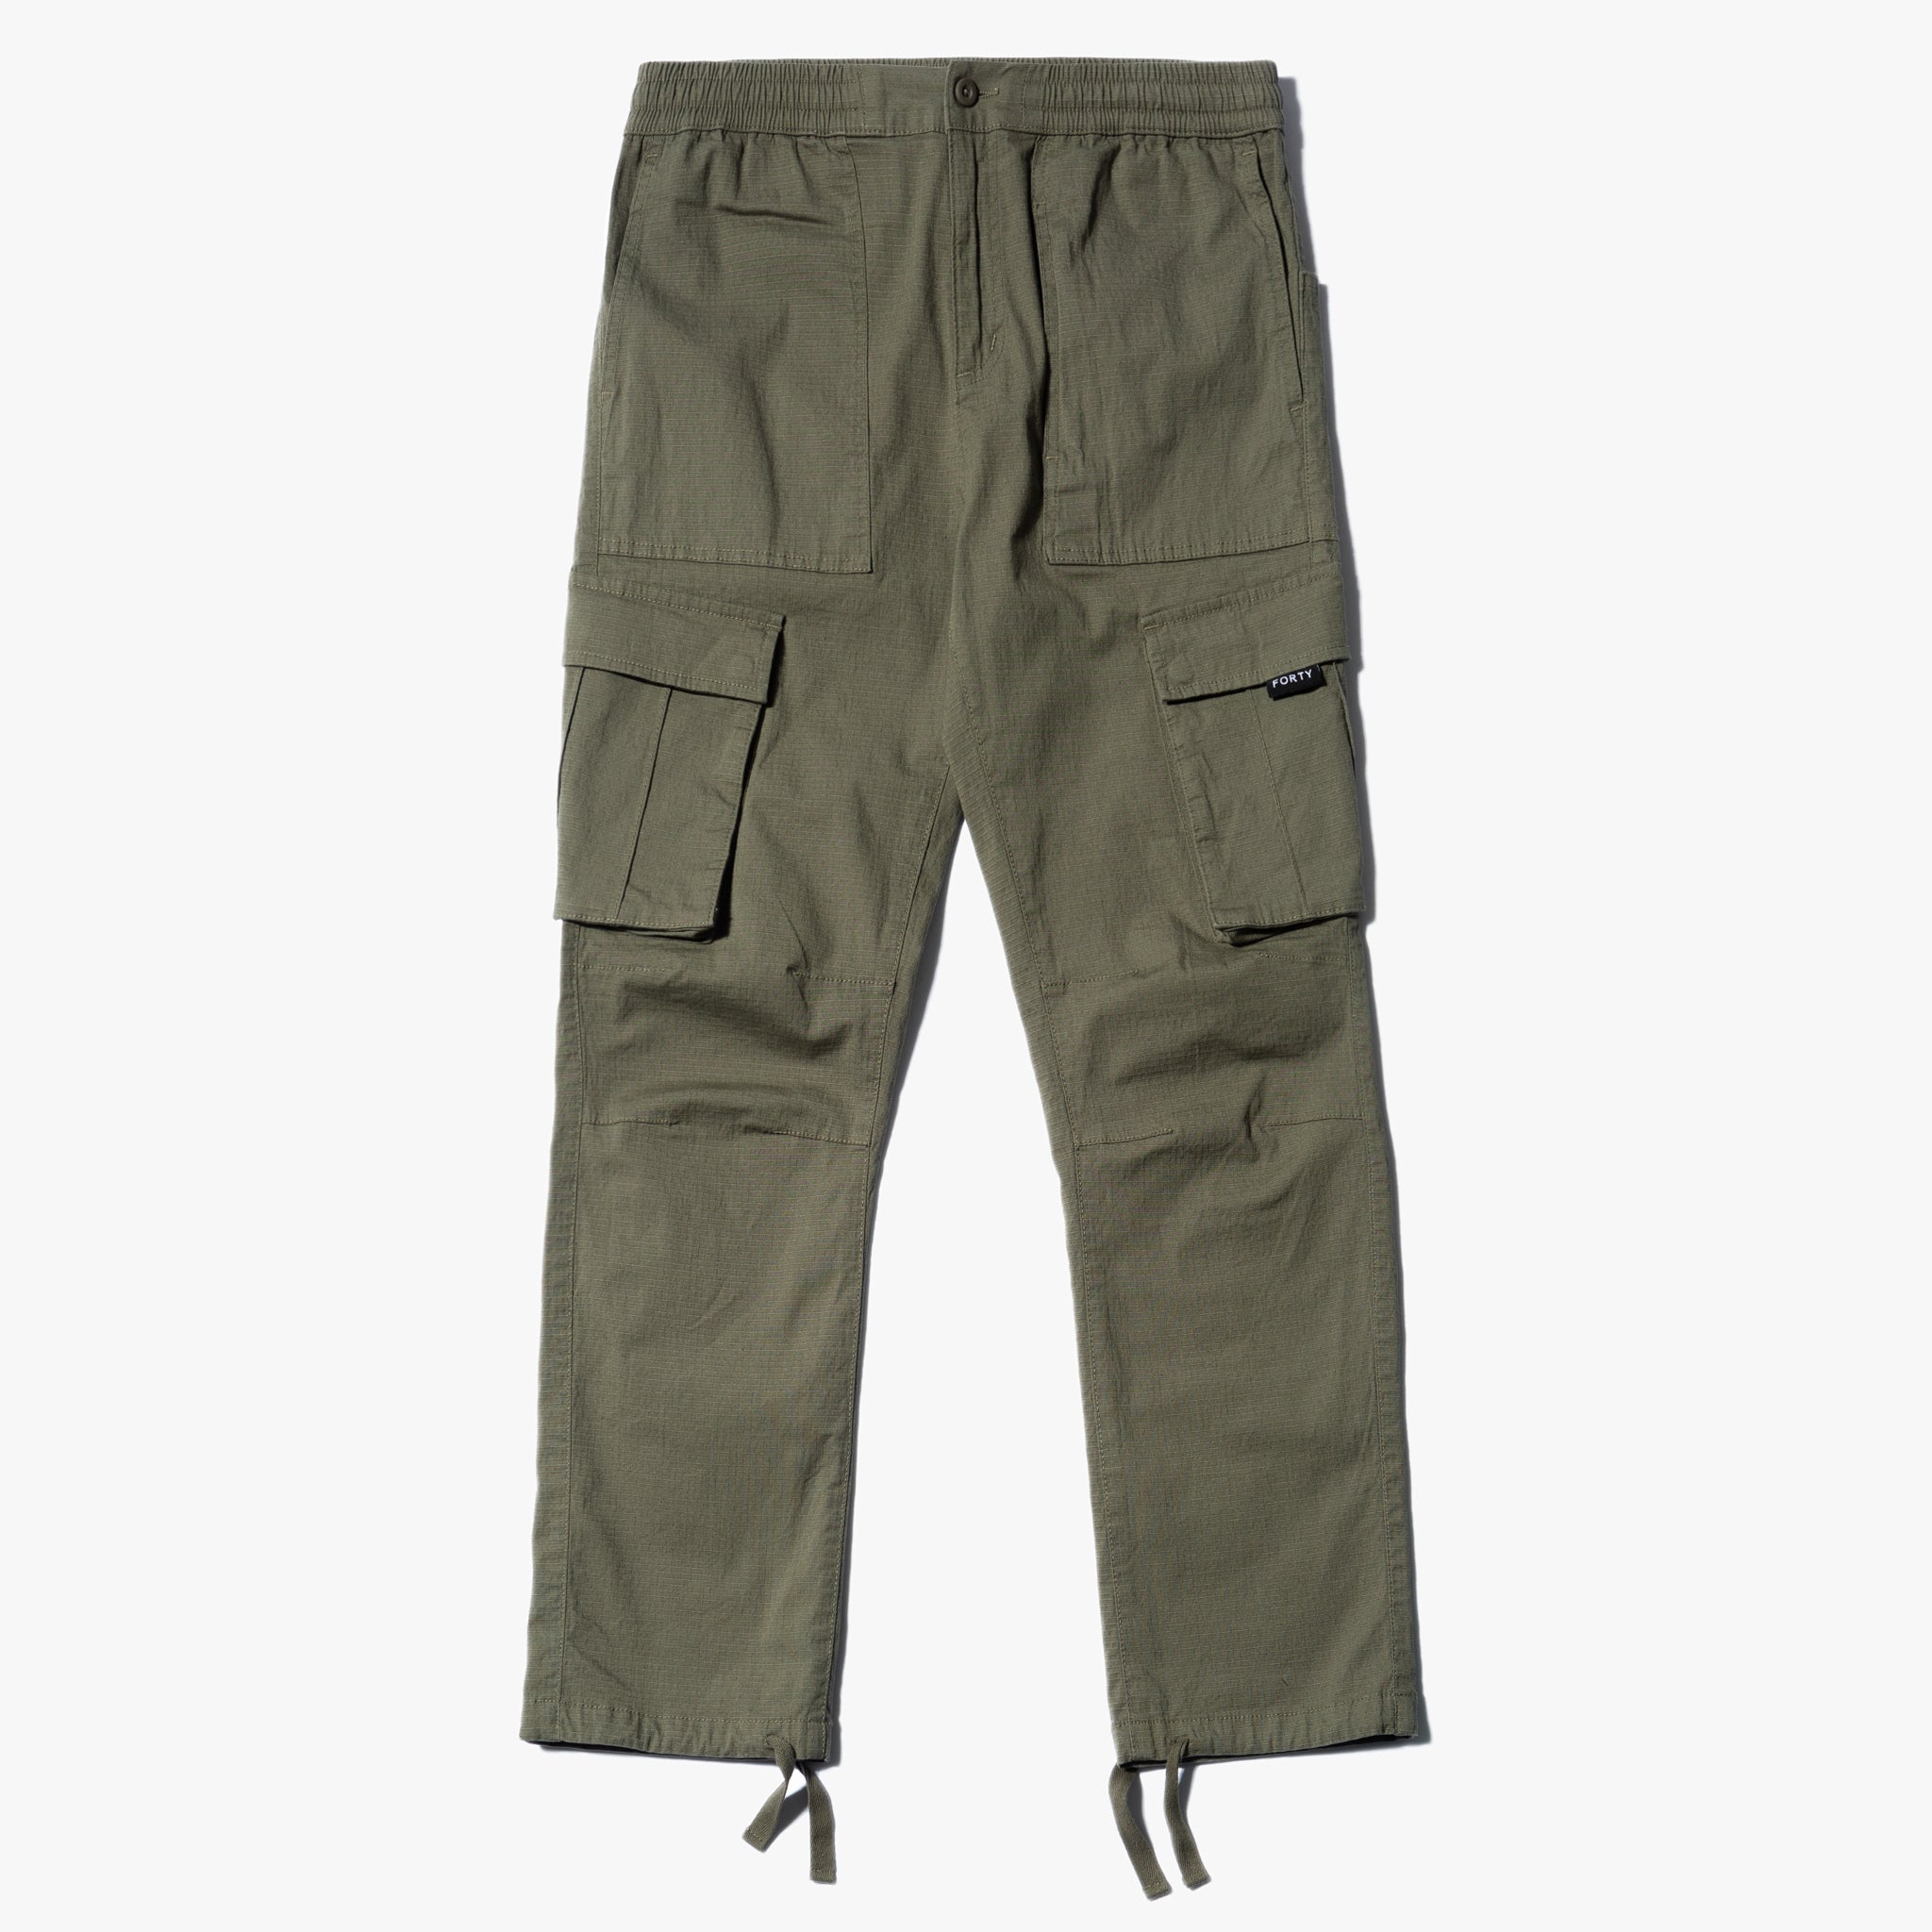 Rip Twill ripstop Cargo Pant (Khaki Green) – Forty Clothing